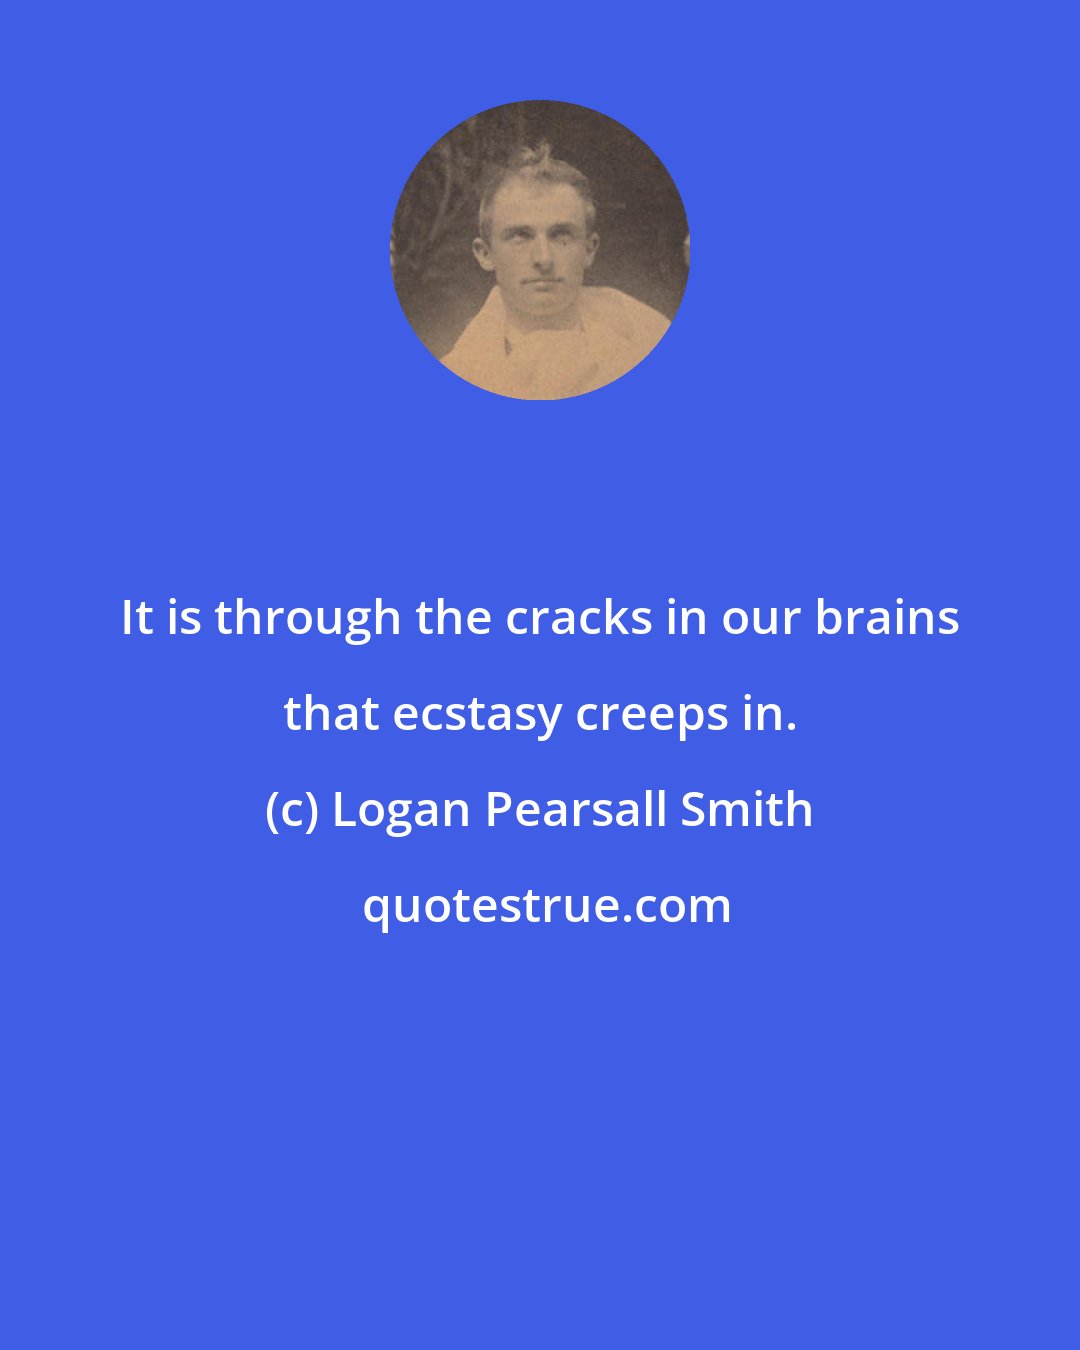 Logan Pearsall Smith: It is through the cracks in our brains that ecstasy creeps in.